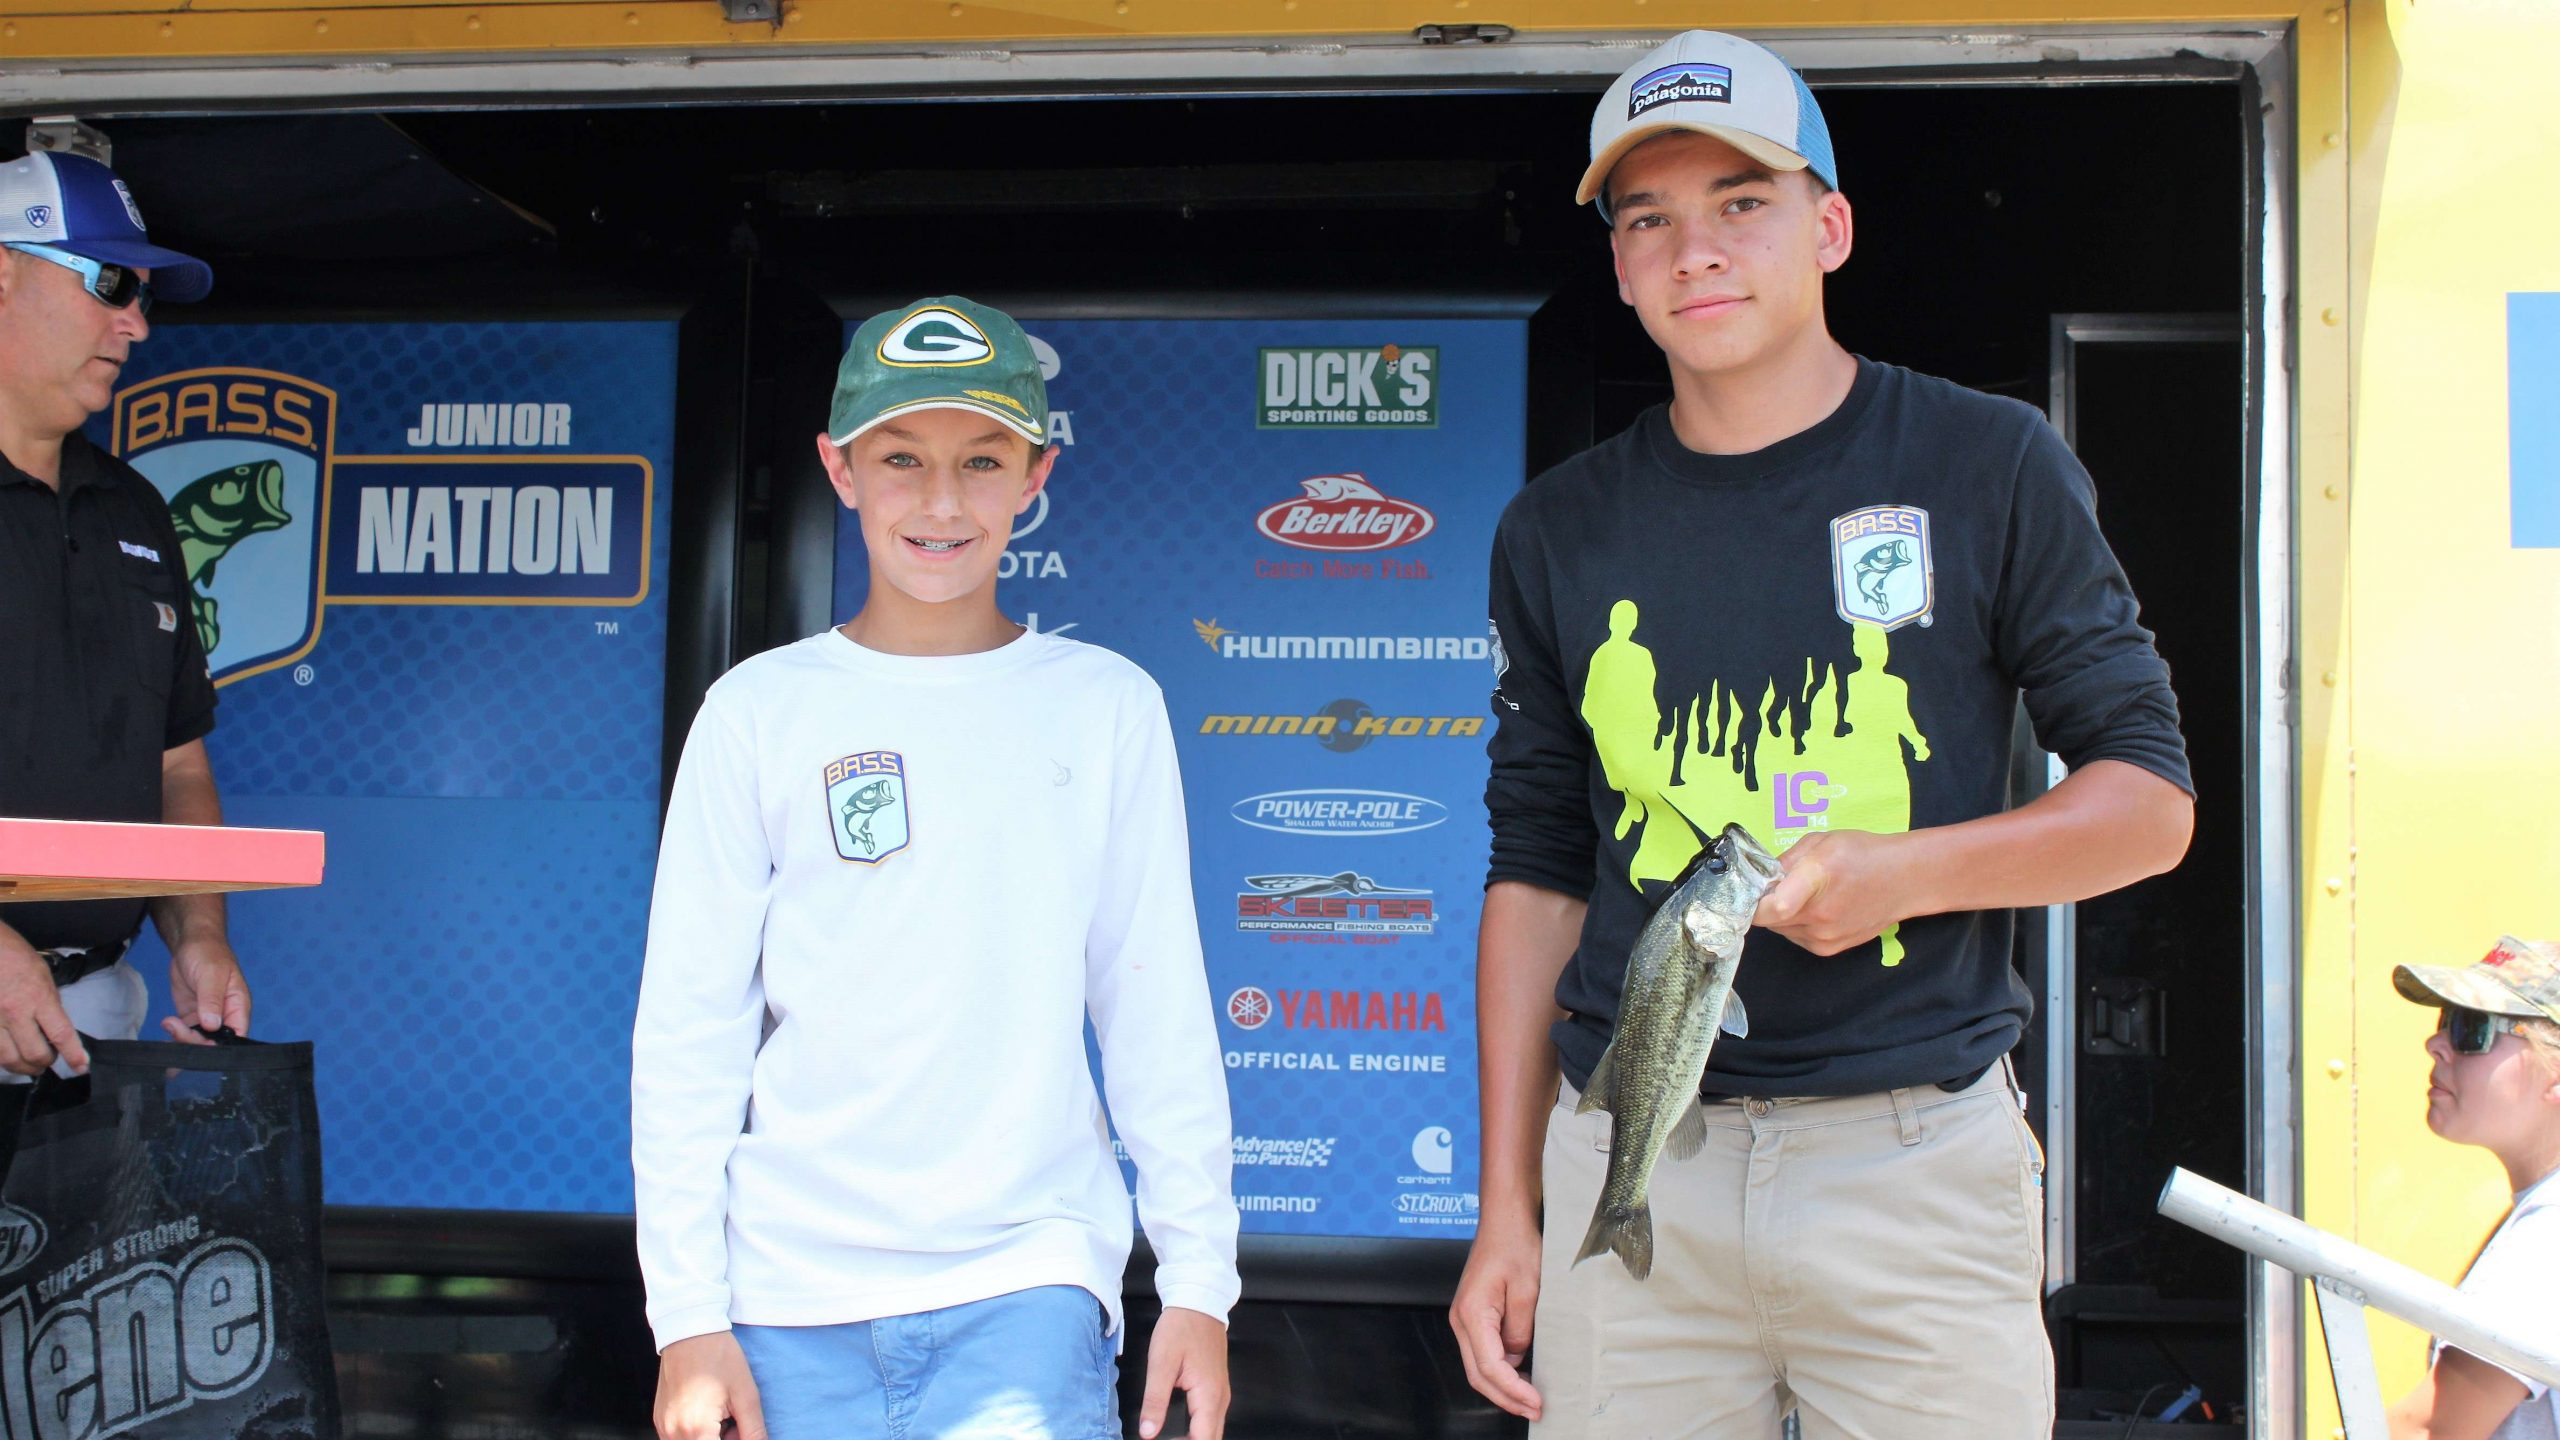  Evan Kembel and Aiden Steury of Colorado are in 50th place with one bass weighing 14 ounces.
